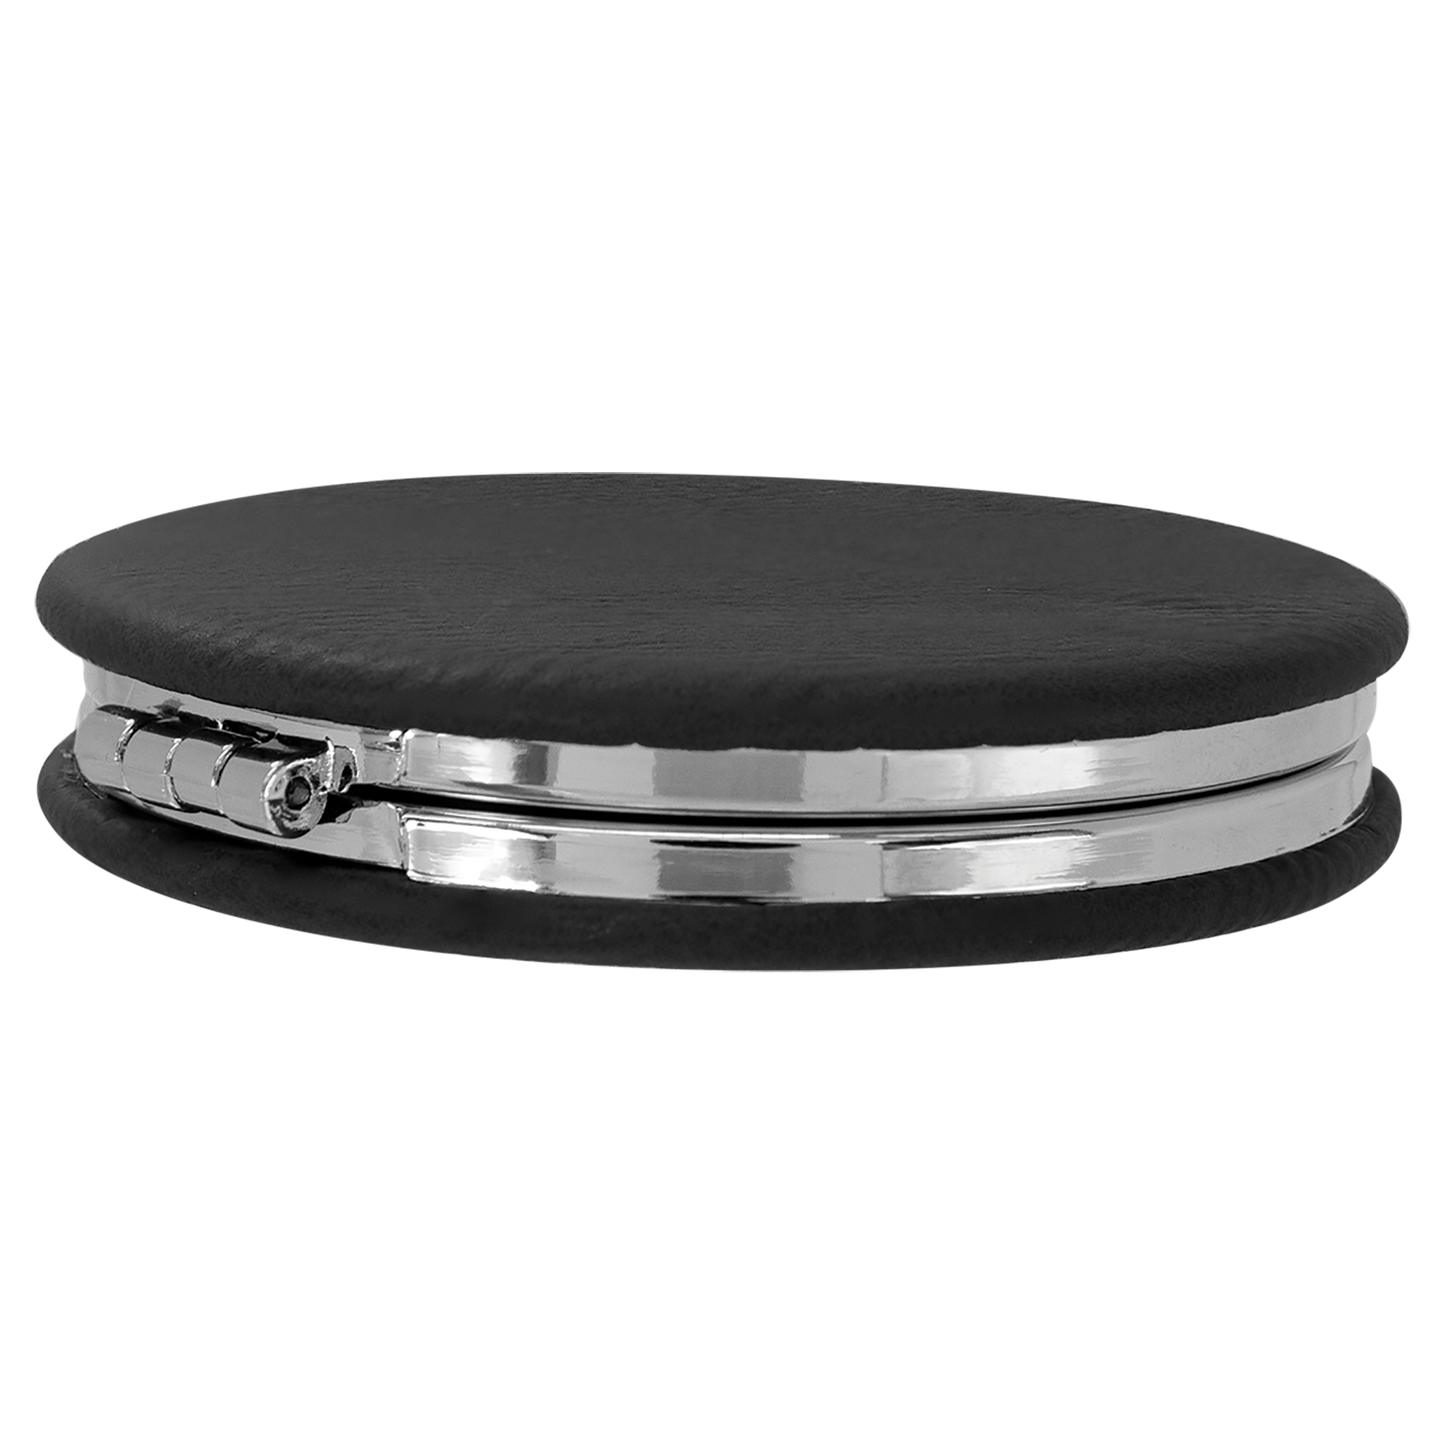 2 1/2" Black/Silver Leatherette Compact Double-Sided Mirror